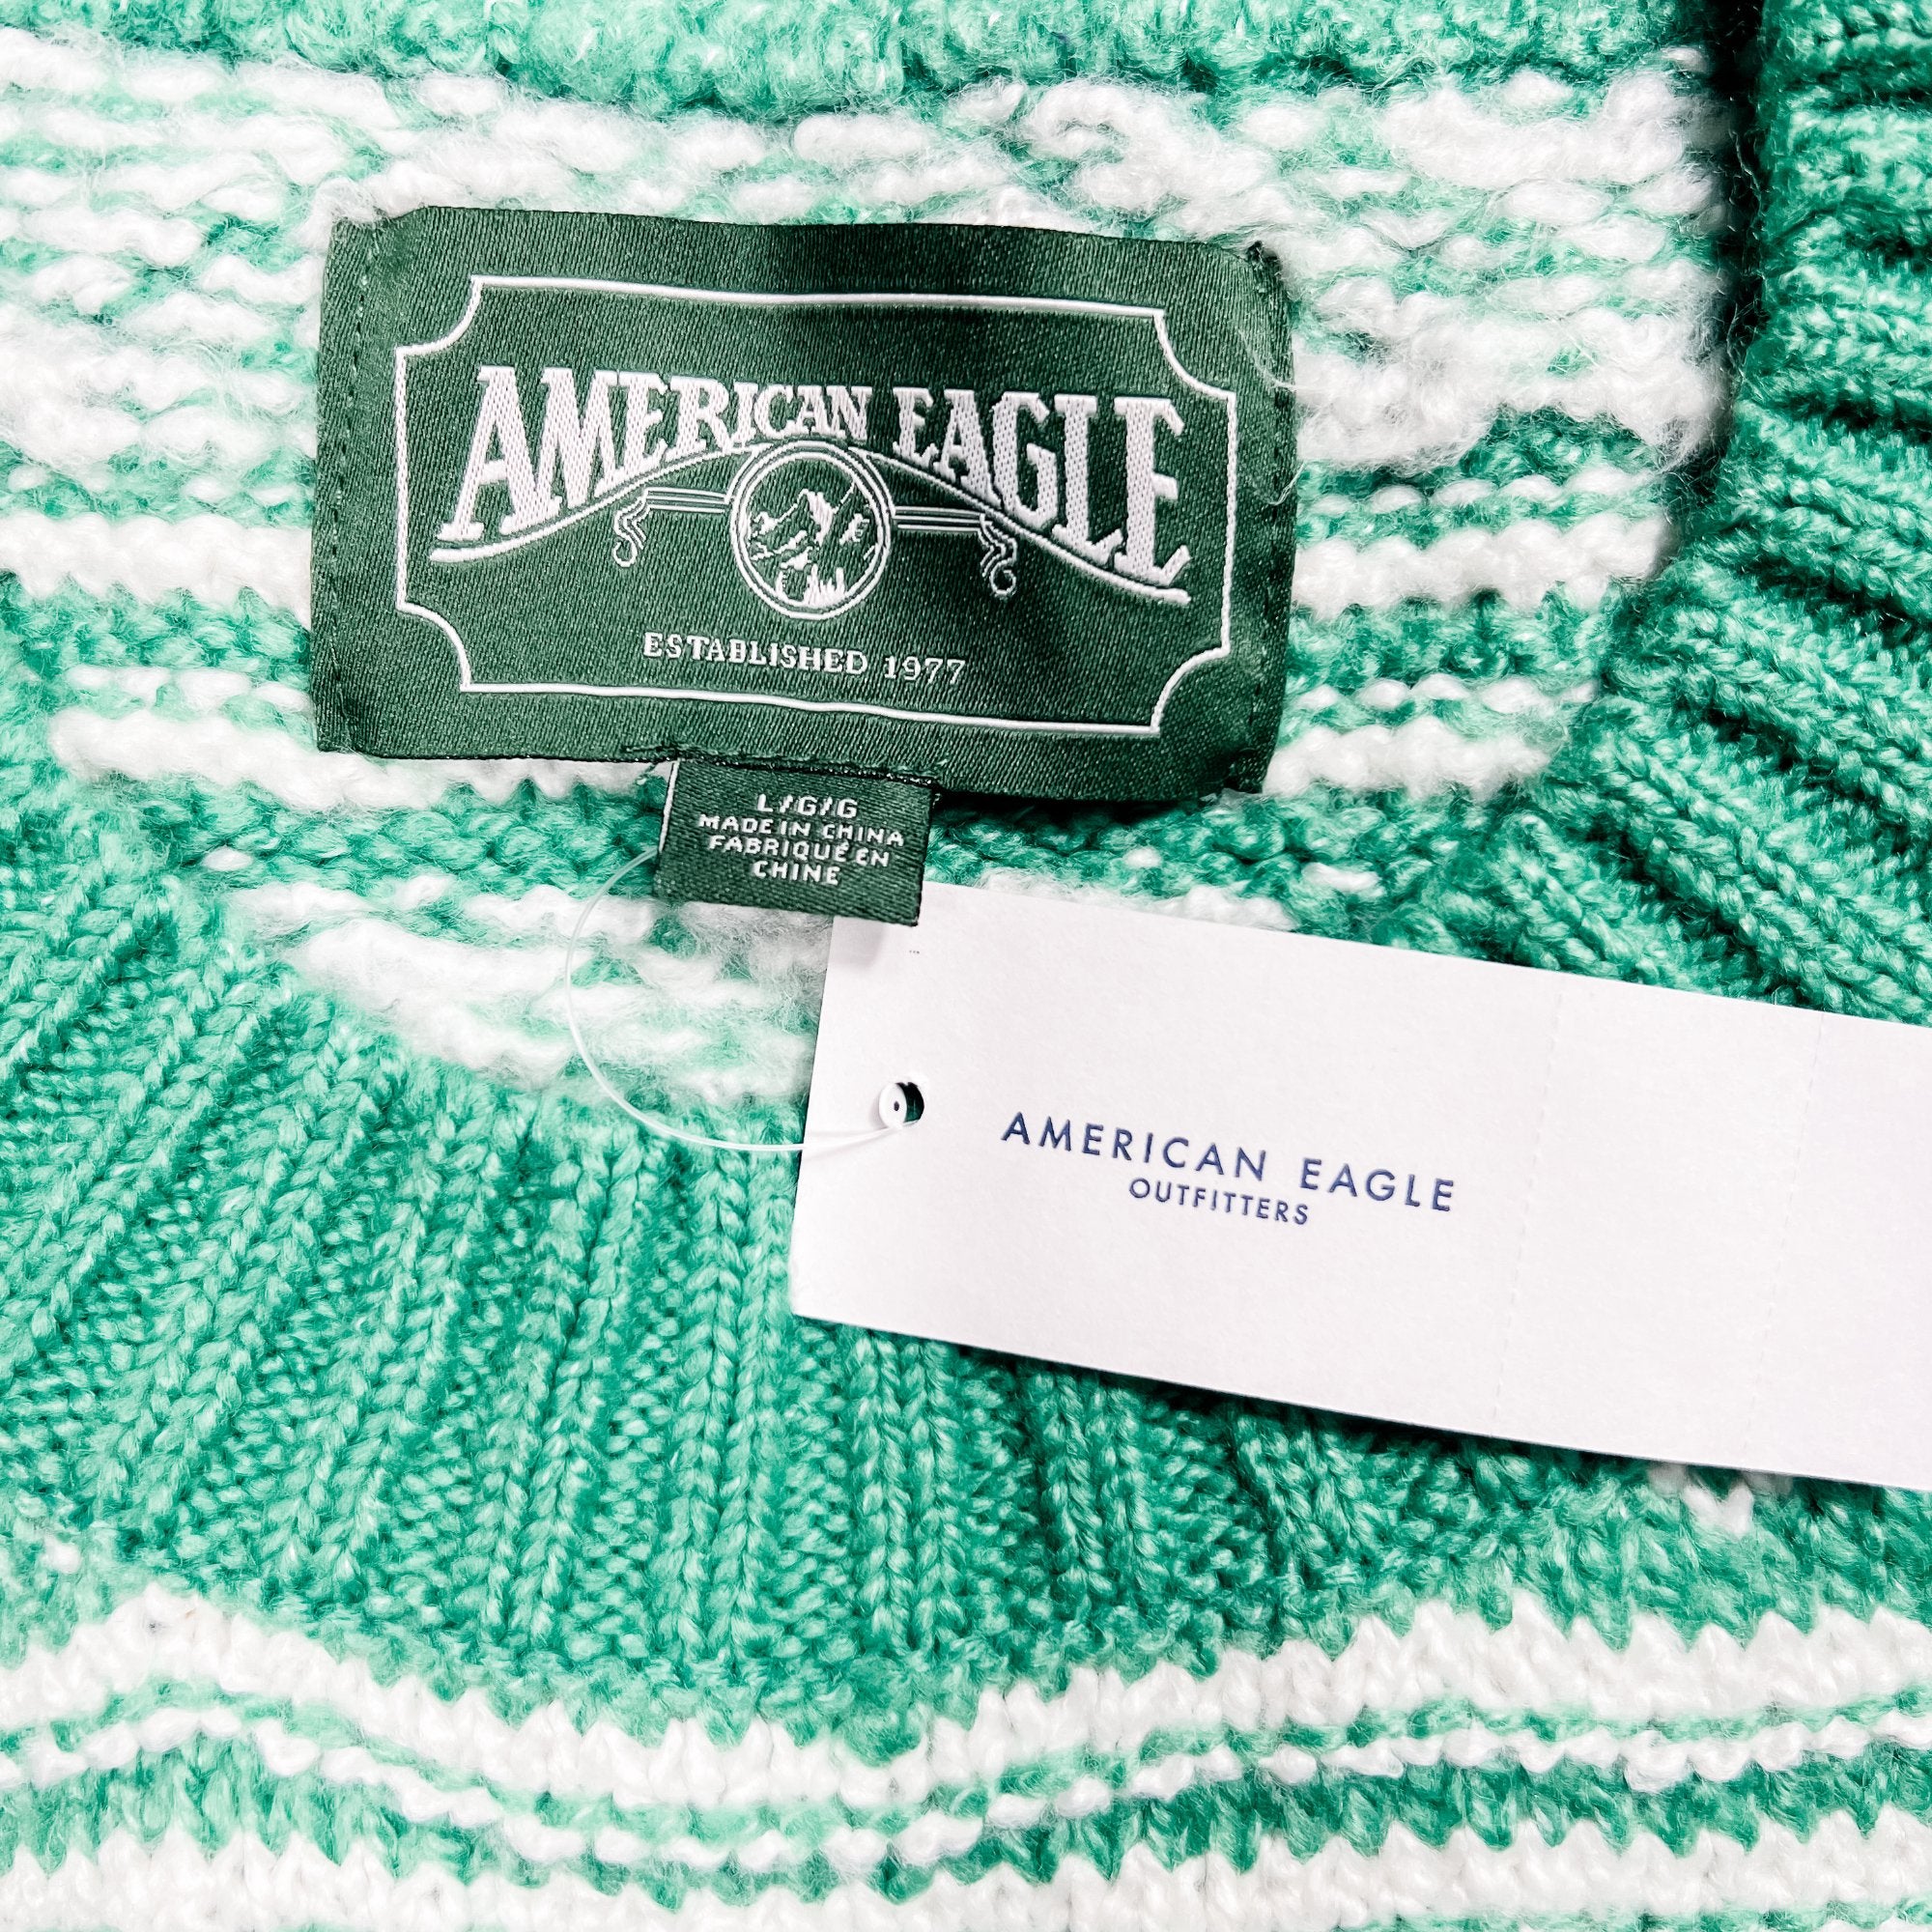 Aerie + American Eagle Assorted Women's New Wholesale Clothing - Boutique by the Box Wholesale for Resellers